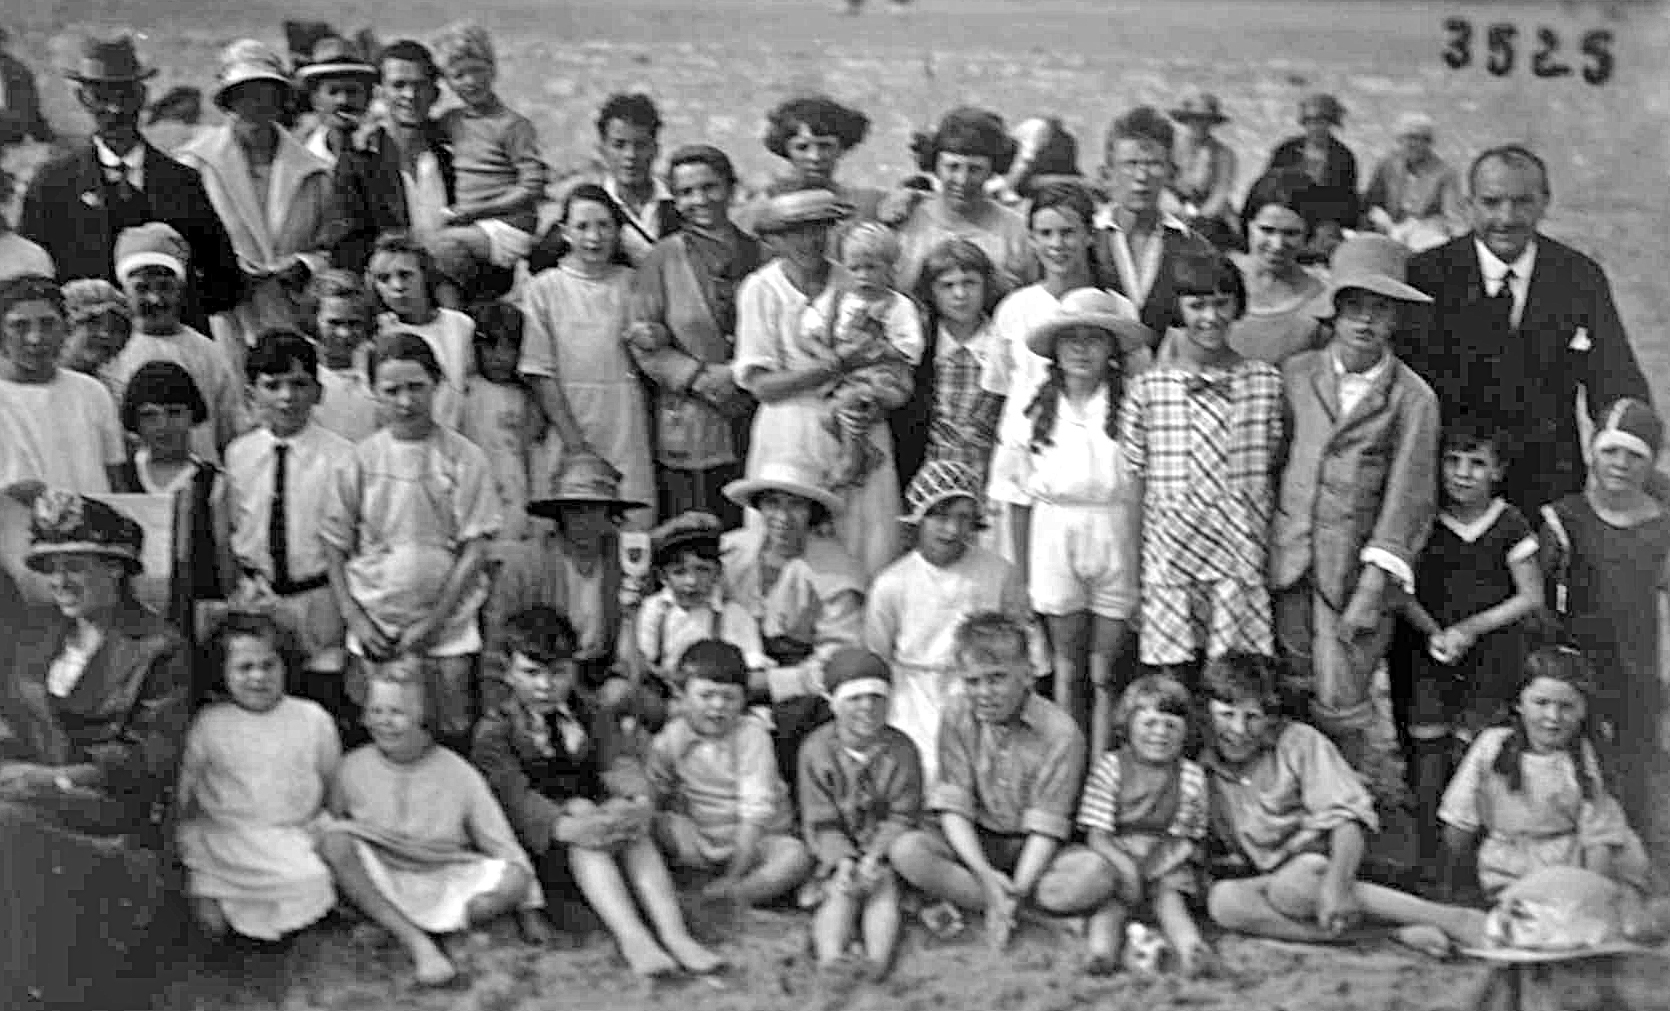 Snap shots of the past. Snap 426 Beach outing august 1923 Sent in by Mrs Jill (gillian) Jones.